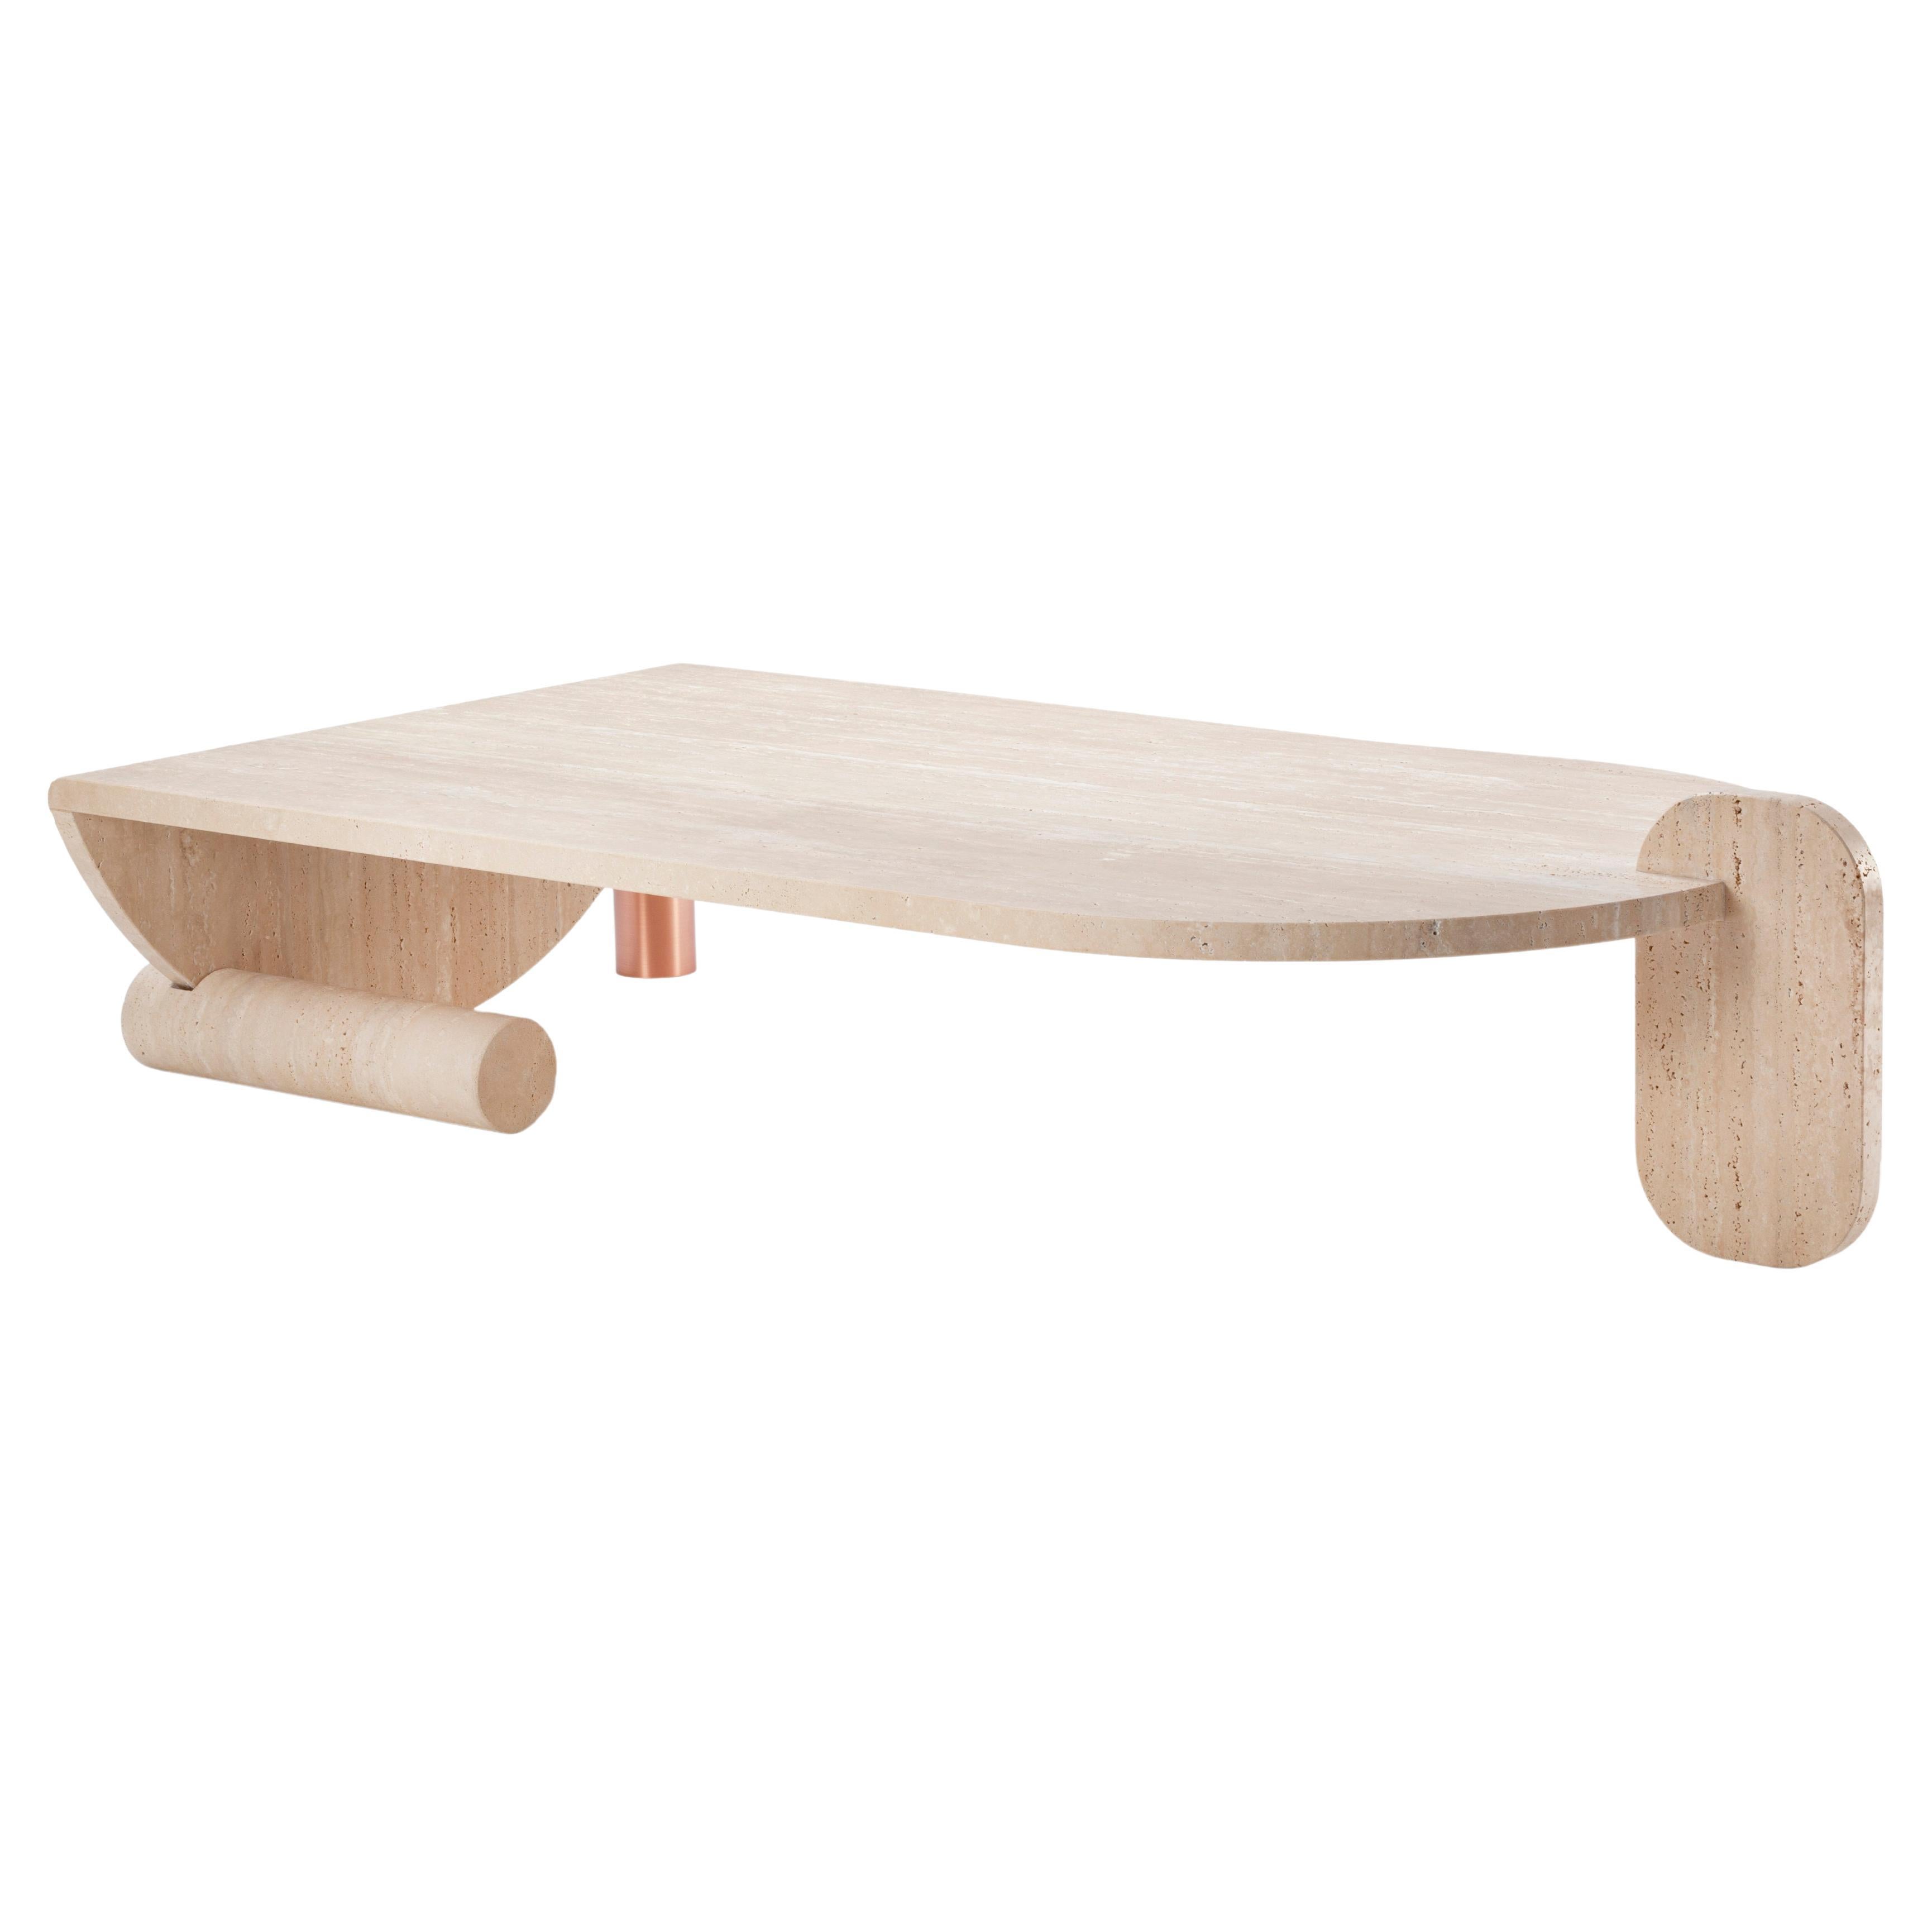 Playing Games Center Table by Dooq For Sale